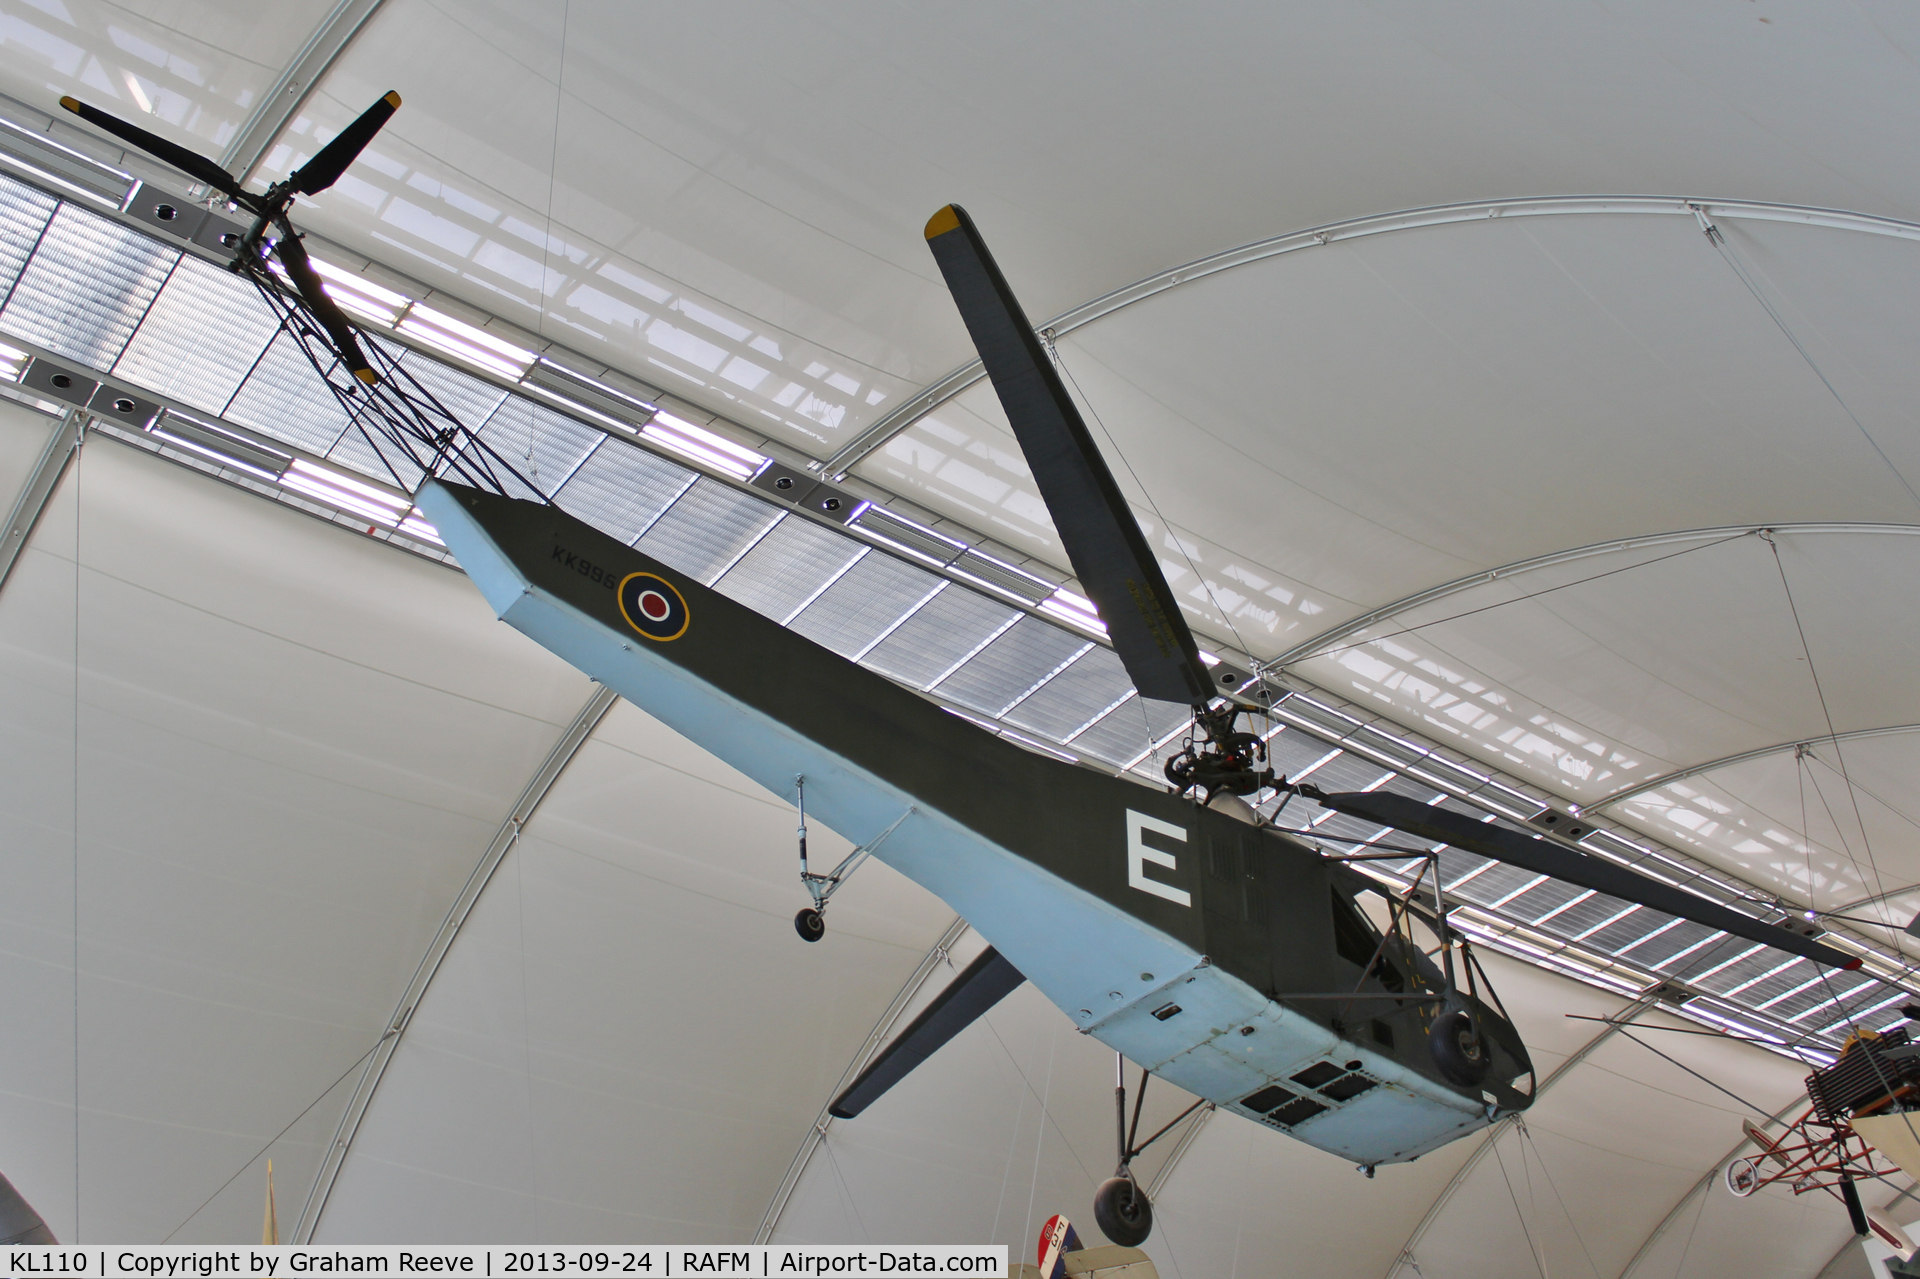 KL110, 1944 Sikorsky R-4B Hoverfly I C/N 140, On display at the RAF Museum, Hendon.